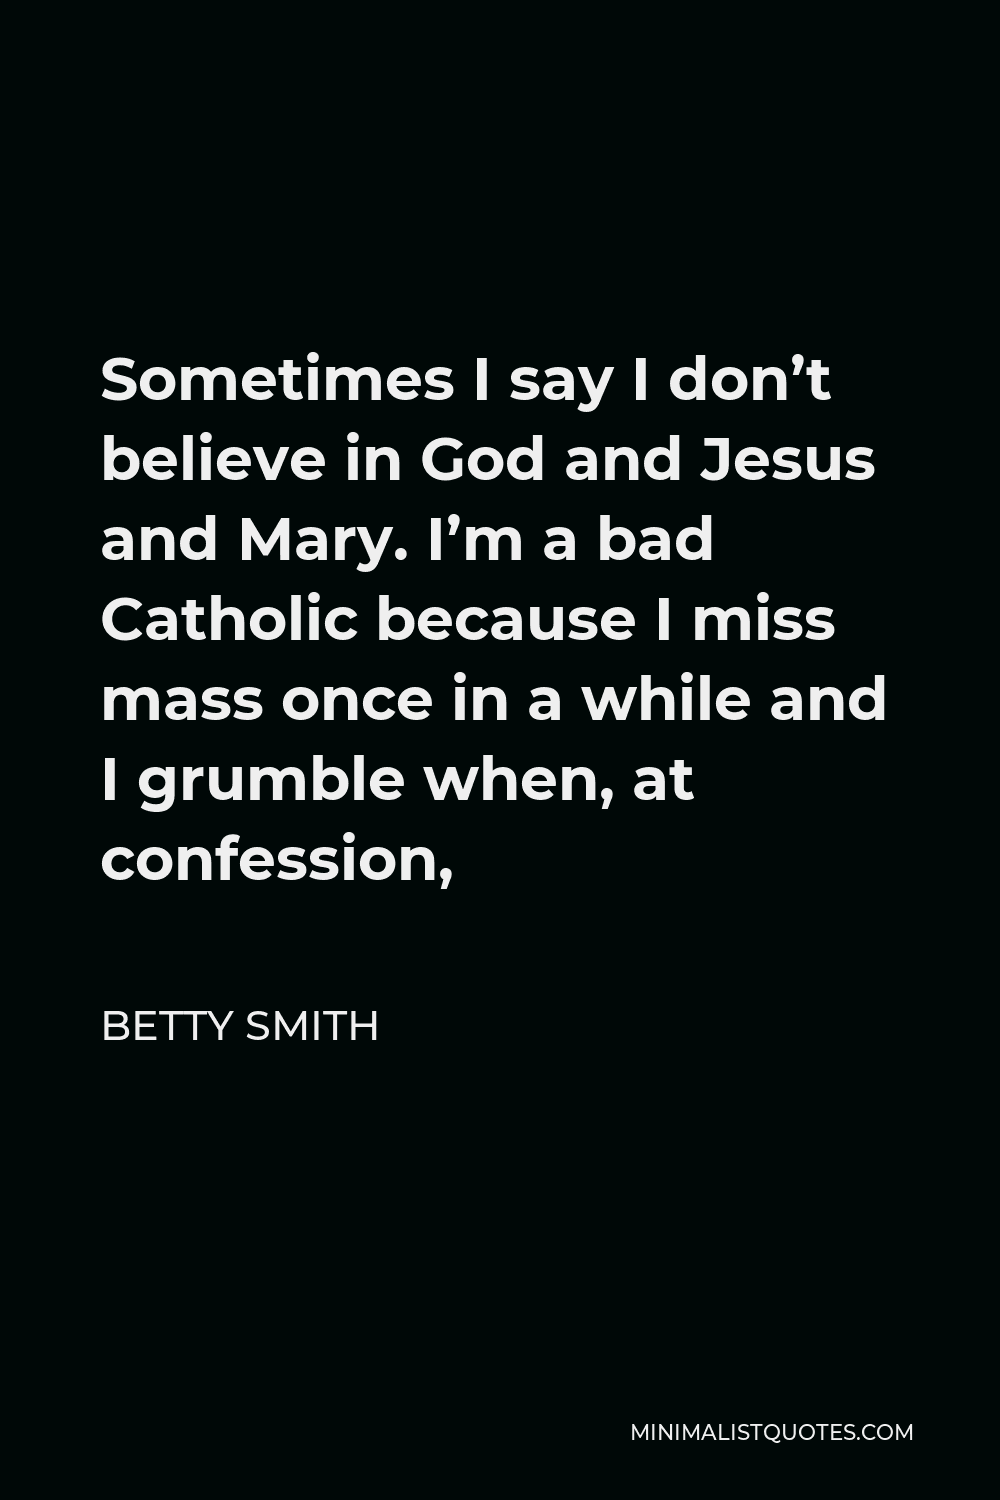 Betty Smith Quote - Sometimes I say I don’t believe in God and Jesus and Mary. I’m a bad Catholic because I miss mass once in a while and I grumble when, at confession,